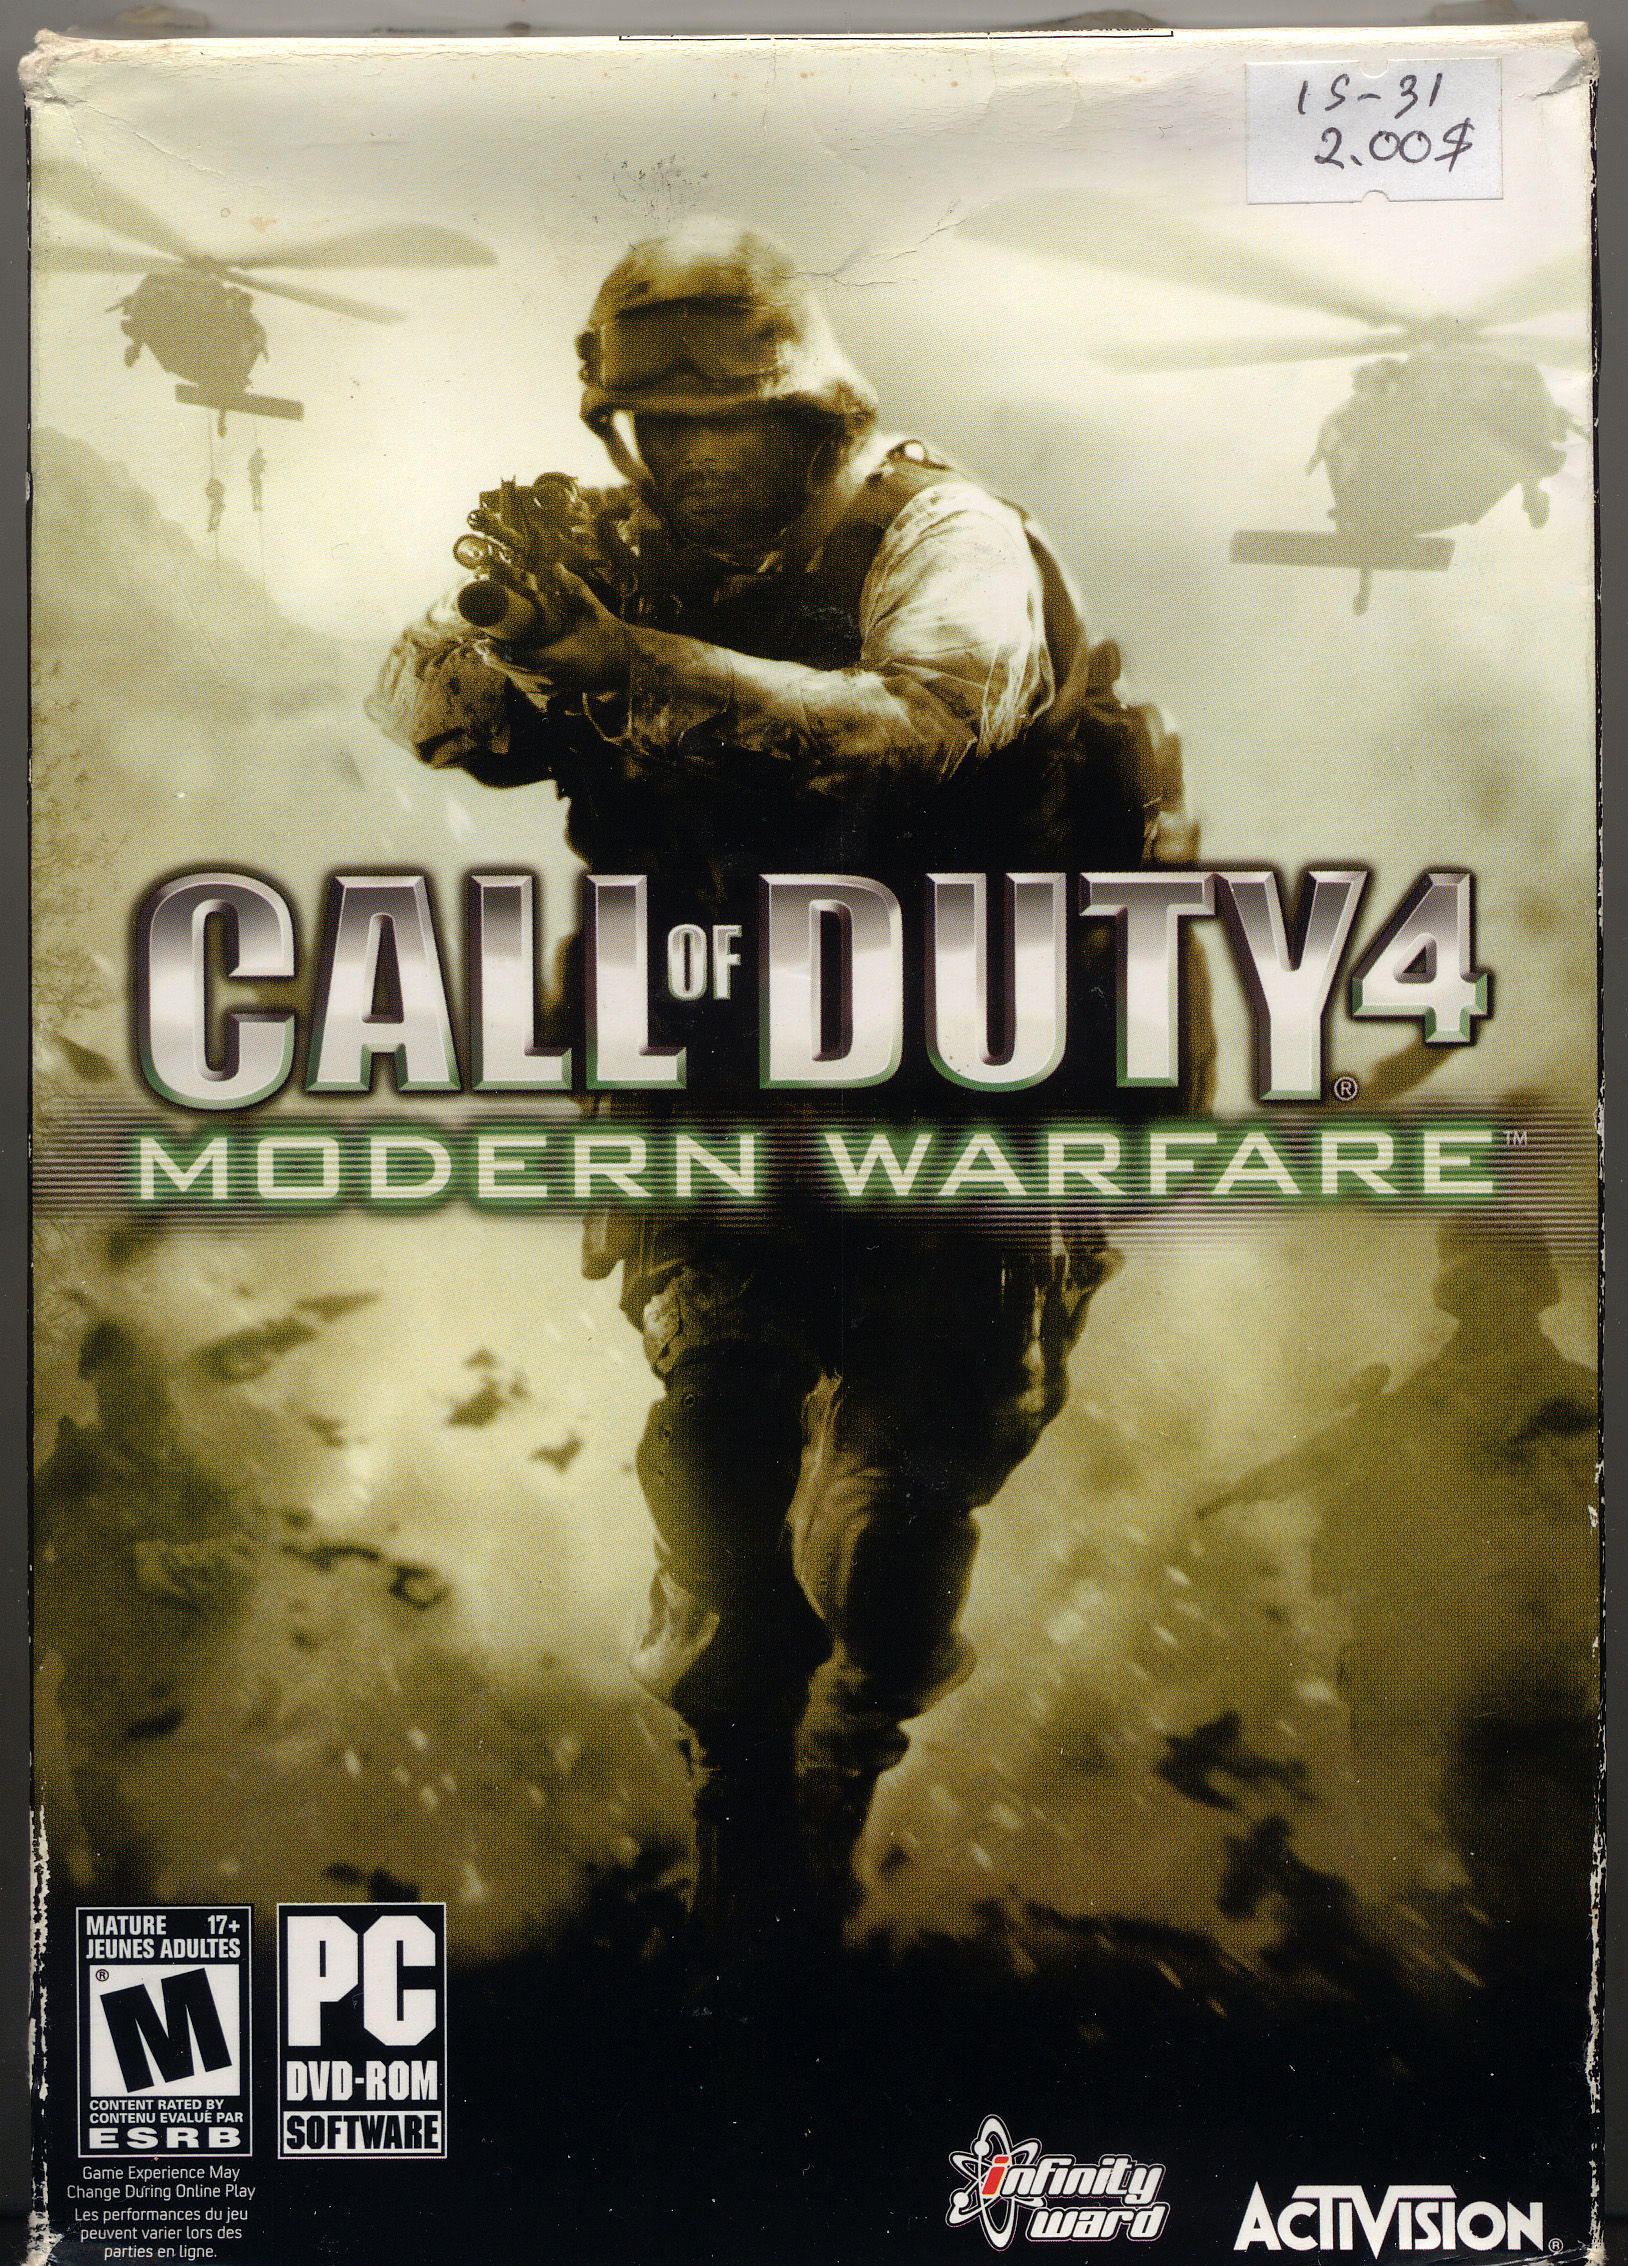 Modern Warfare 2 (2022) 15 Free Ingame Items with code @ Activision